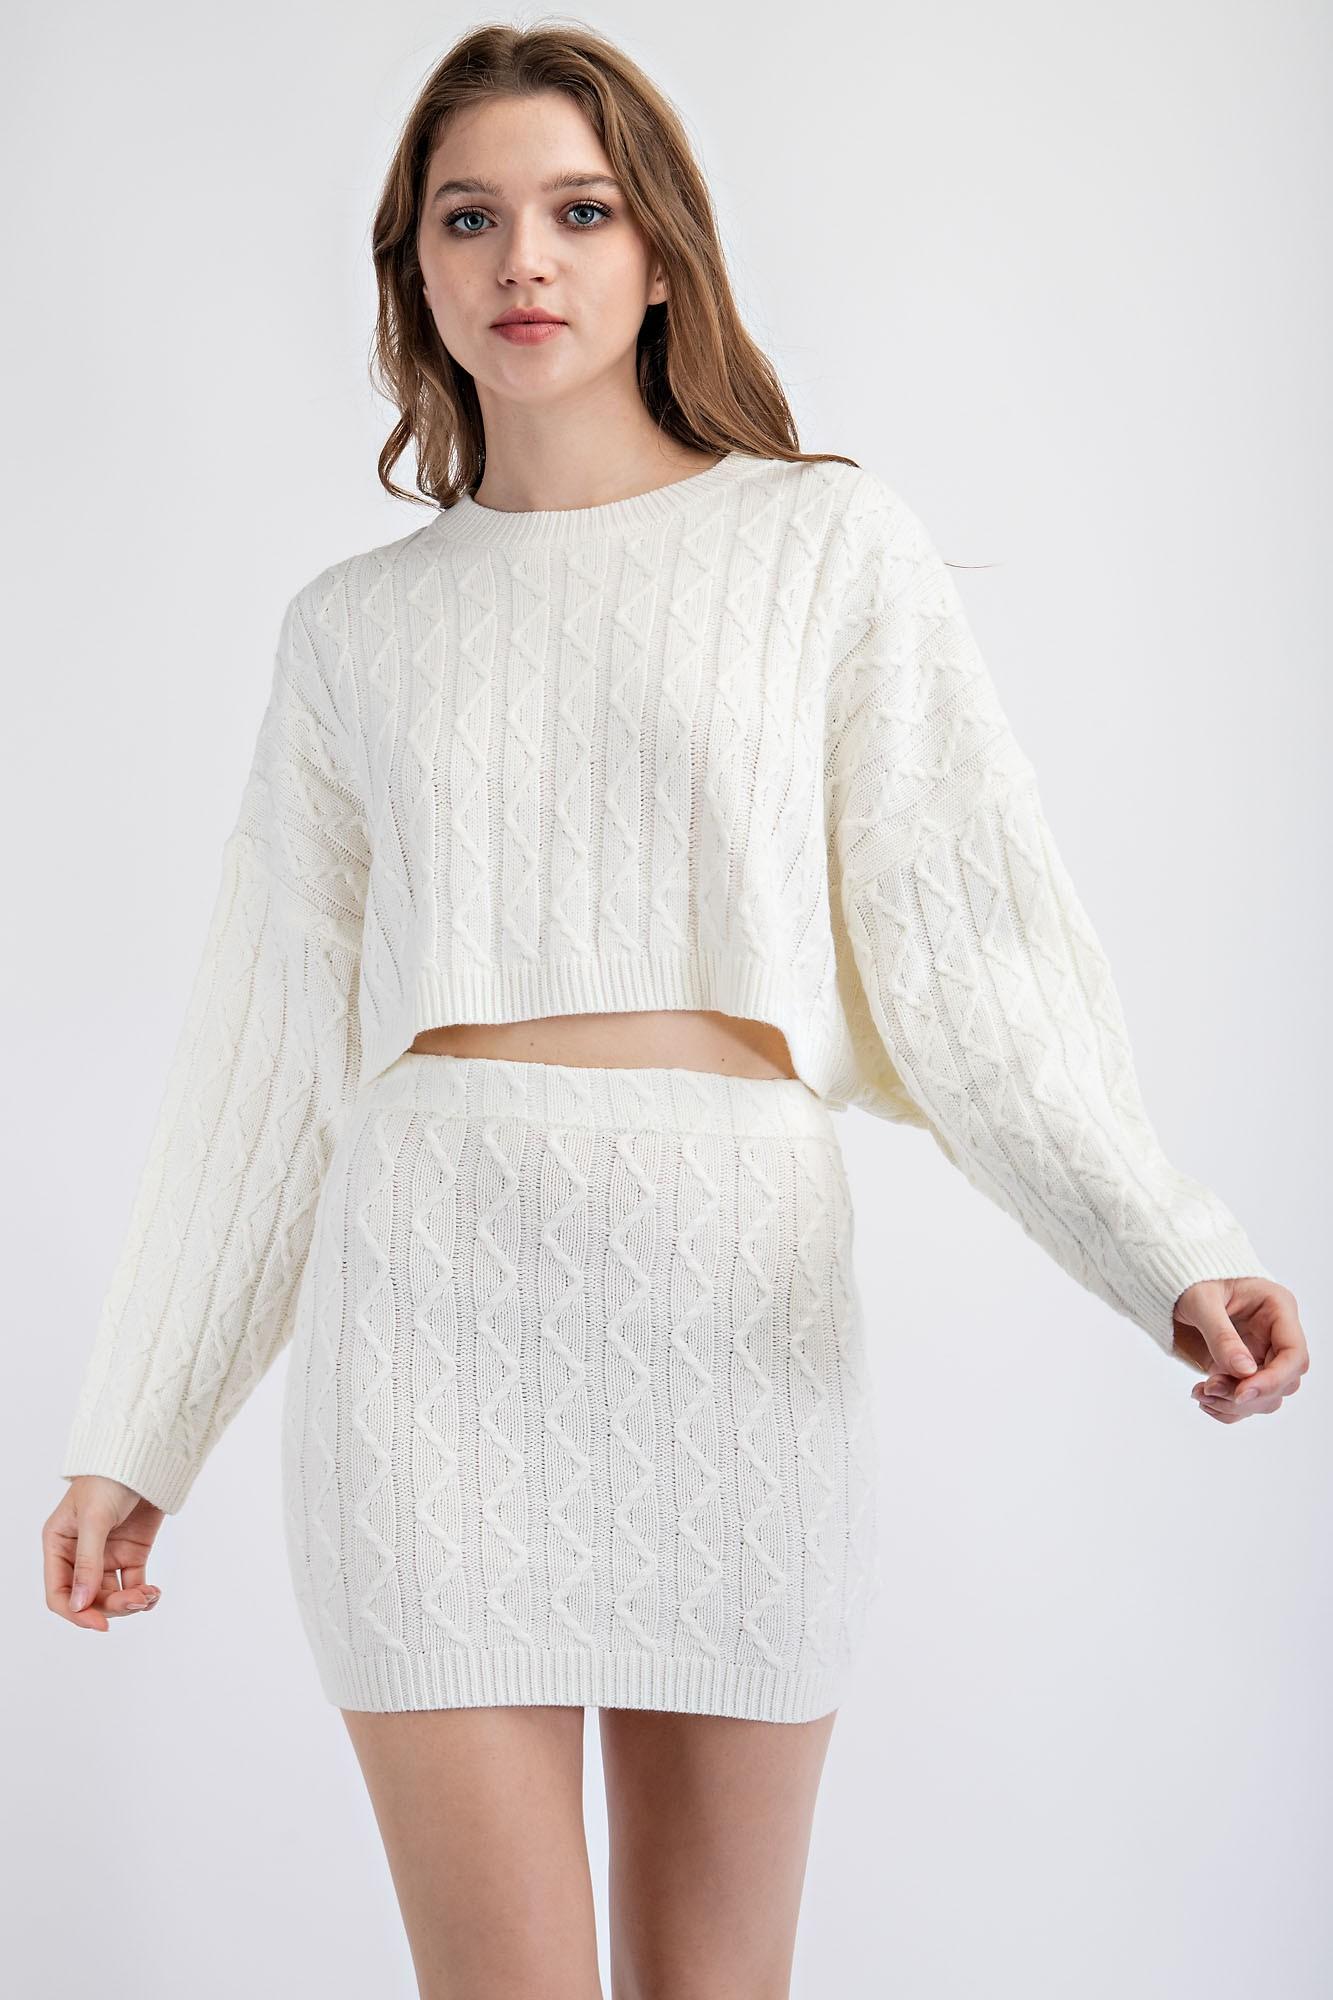 Choosing Me Cable Knit Crop Sweater And Skirt Set